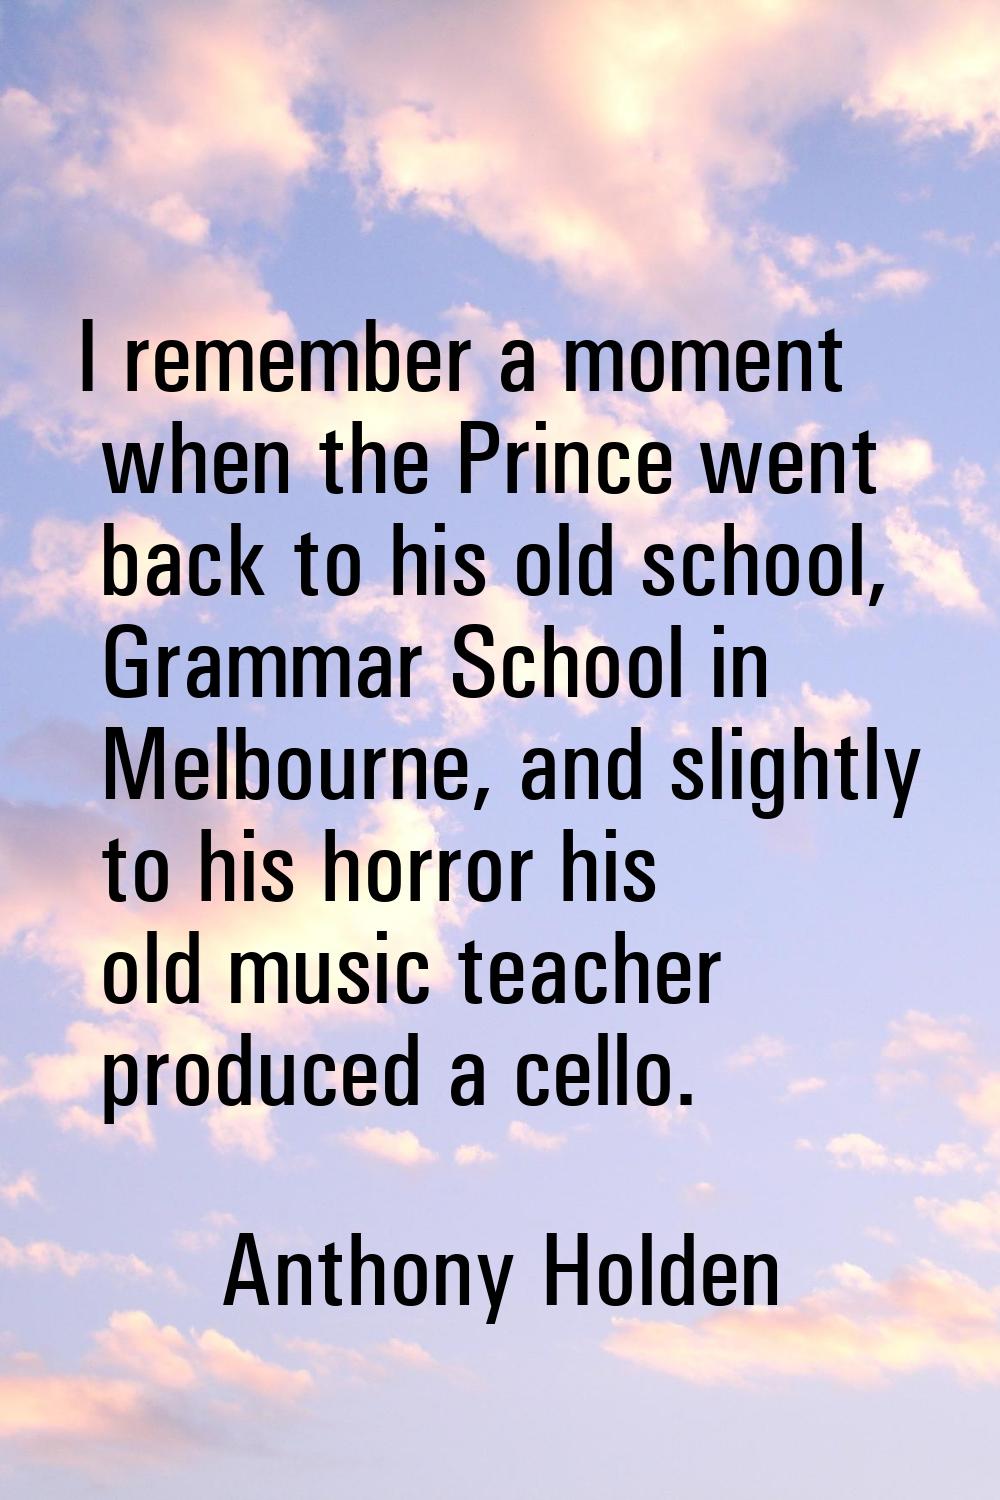 I remember a moment when the Prince went back to his old school, Grammar School in Melbourne, and s